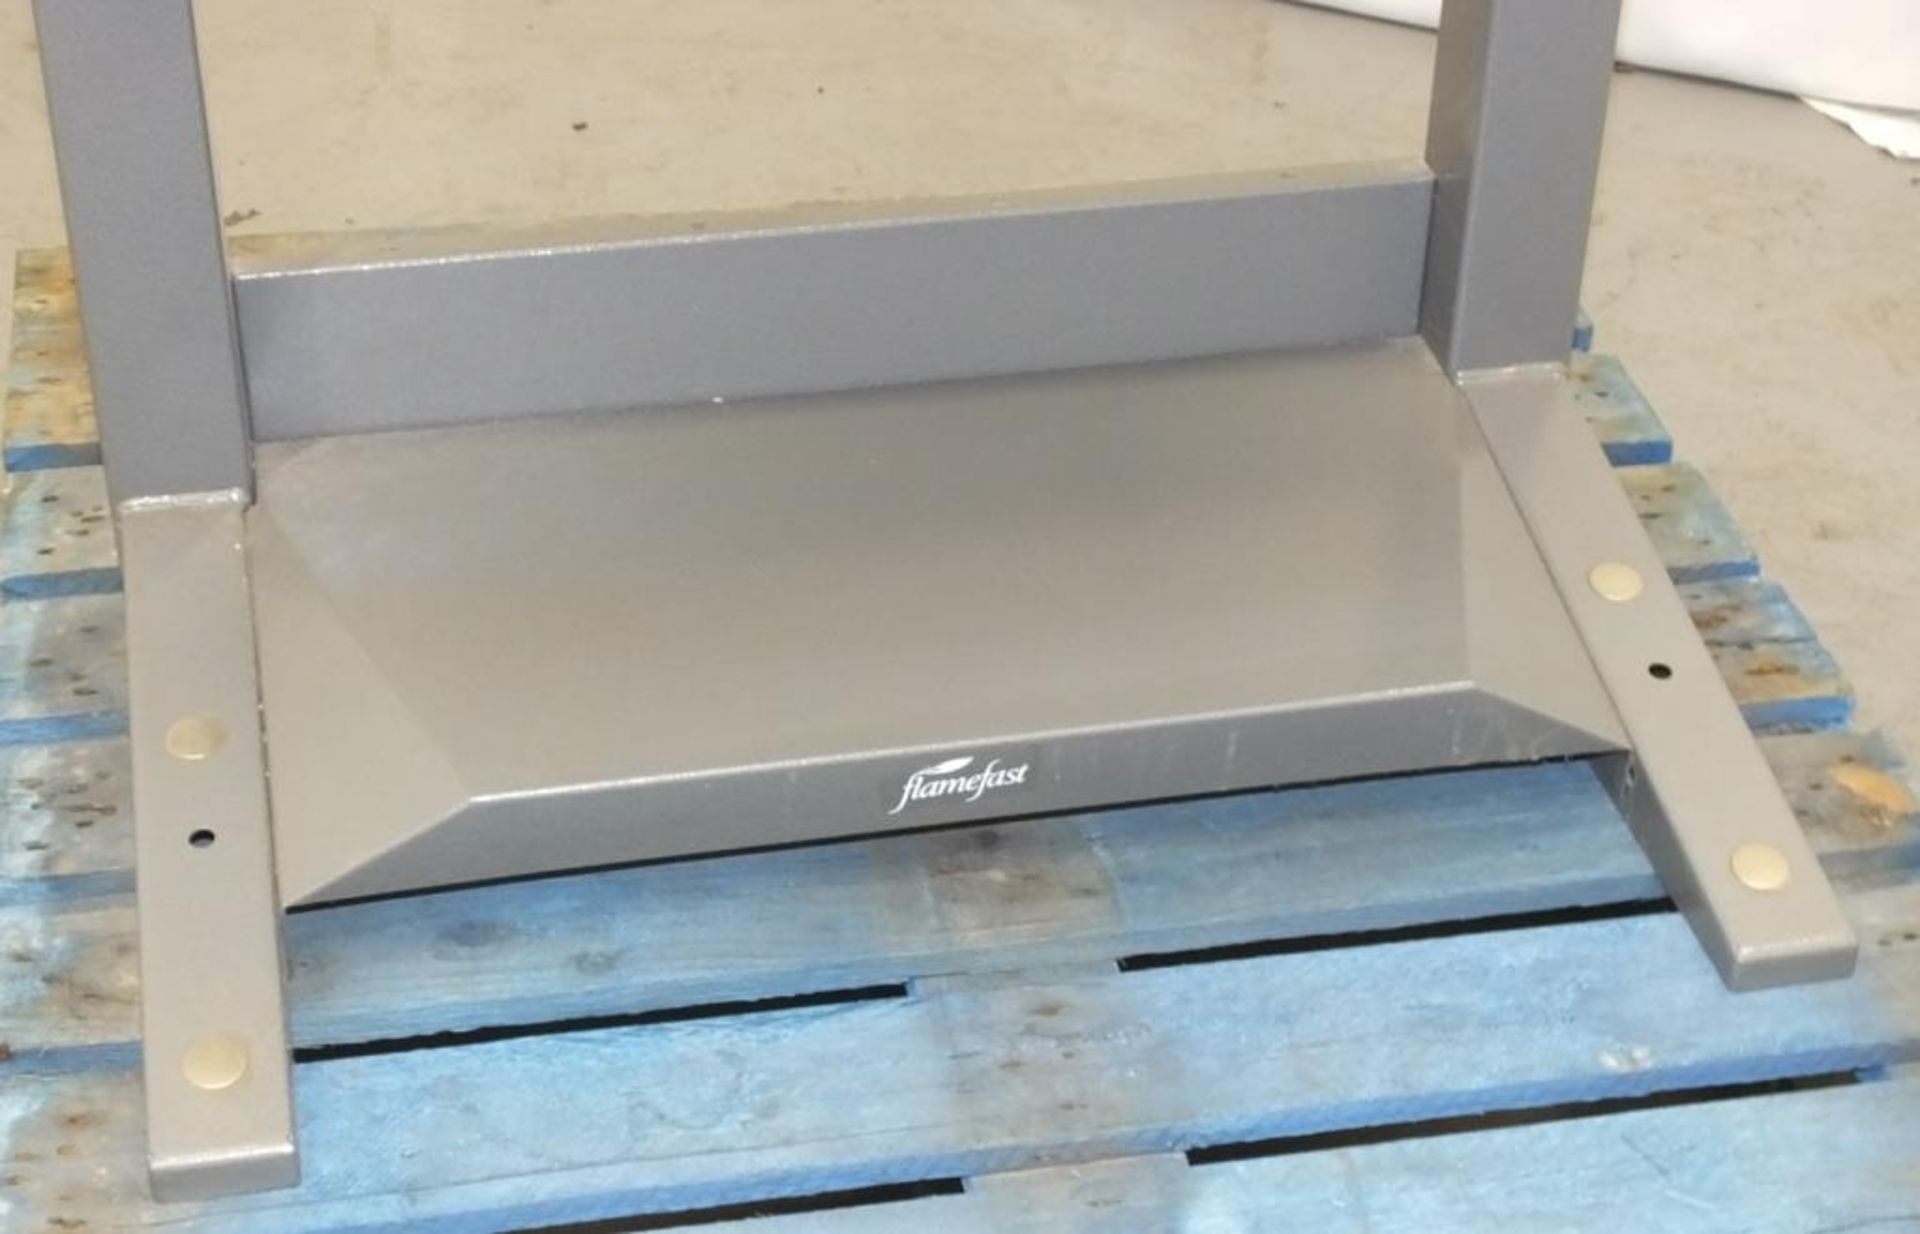 Flamefast metal work bench - L 820mm x D 600mm x H 1210mm - Image 3 of 5